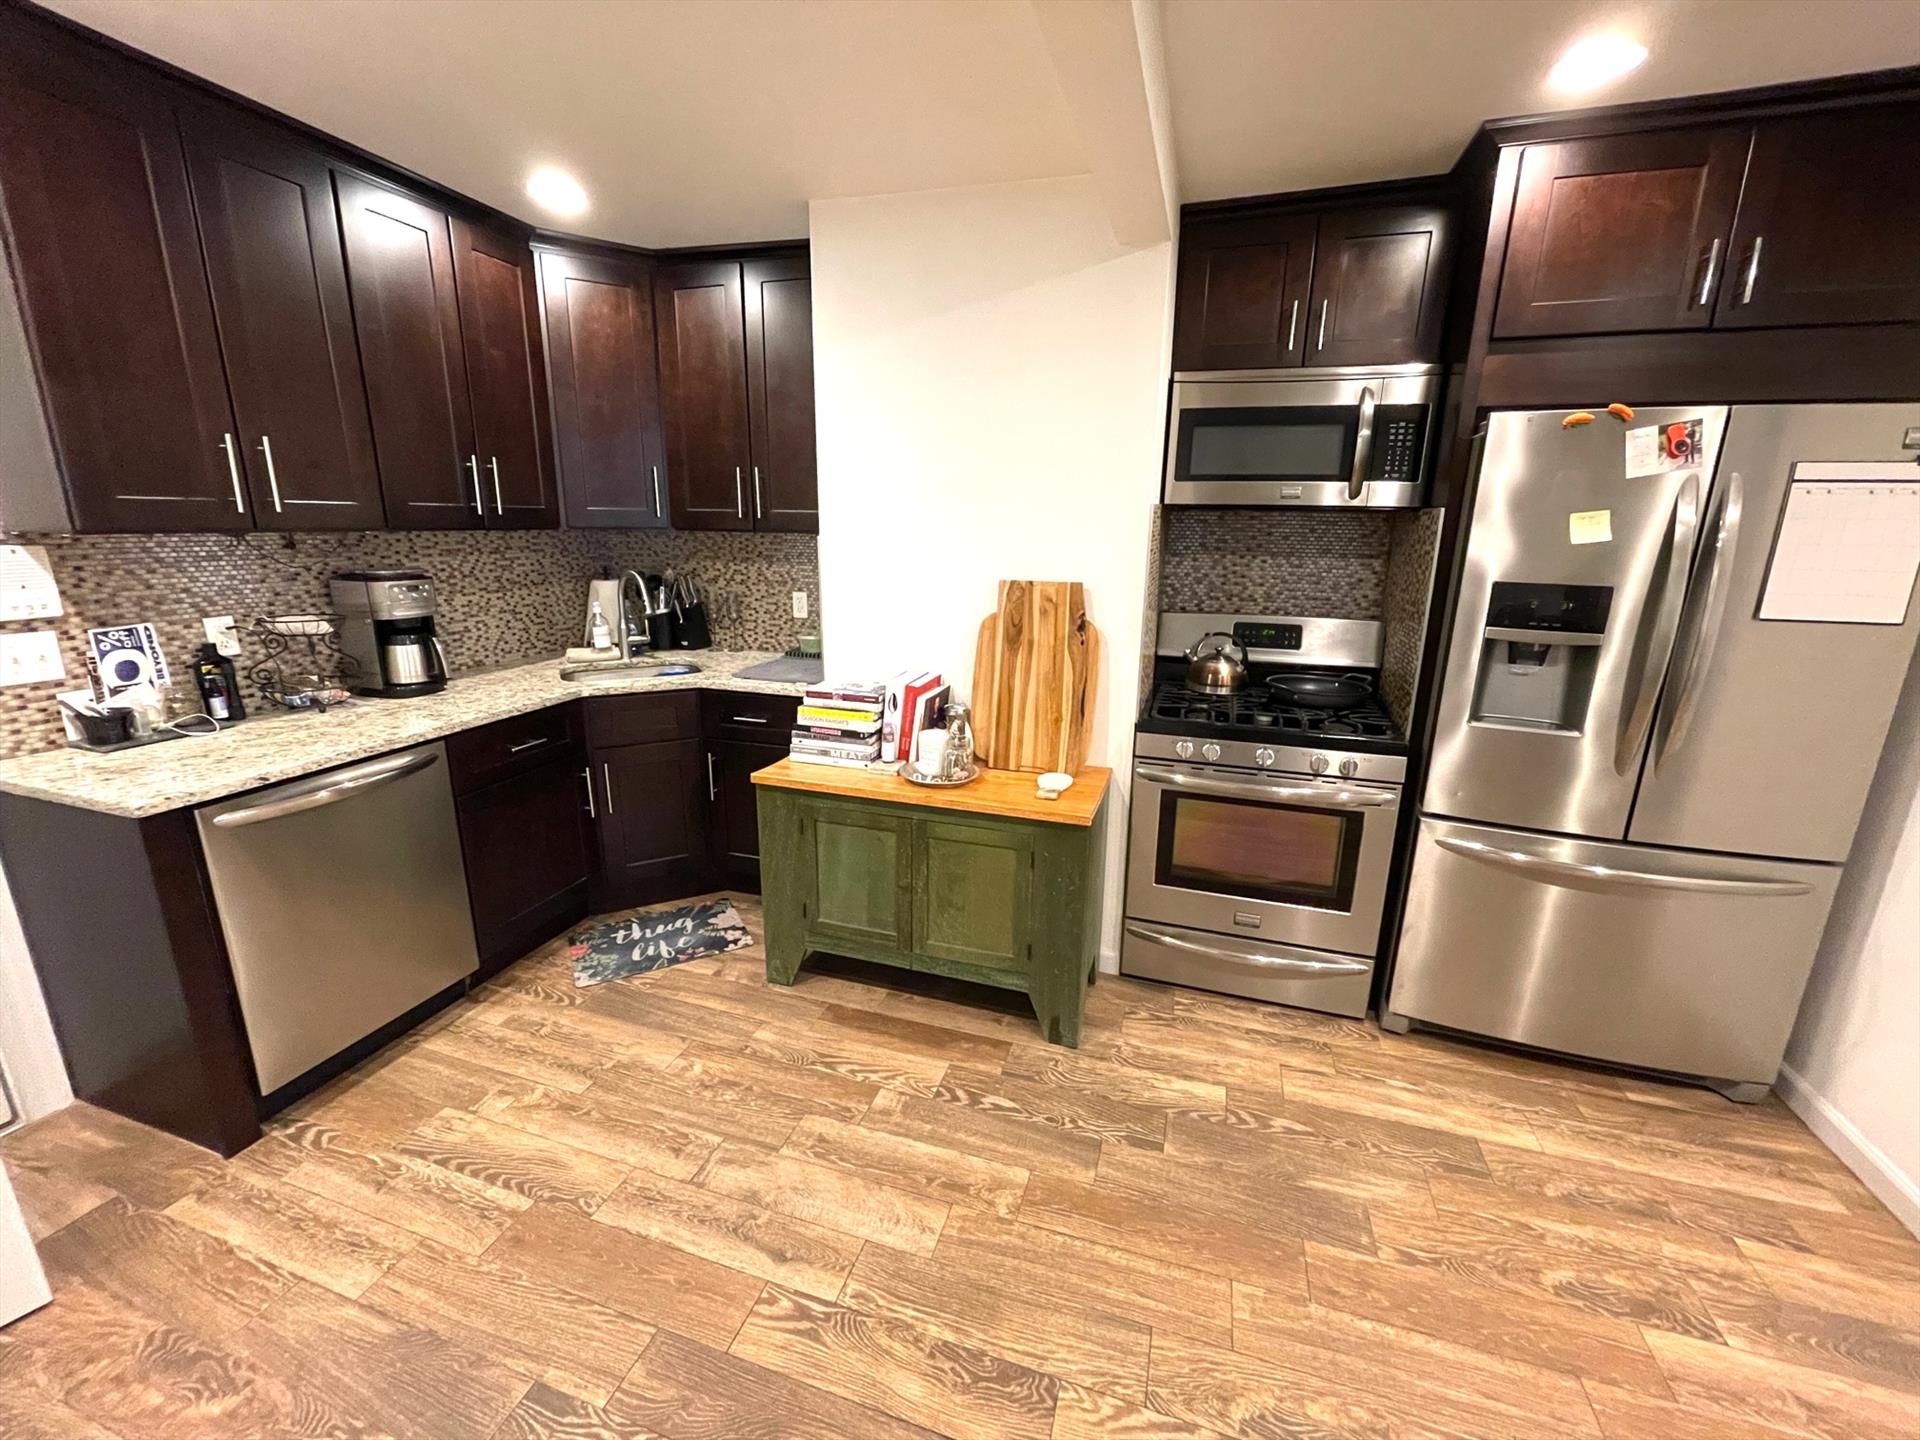 Completely renovated two bedroom in the heart of Hoboken. Be the first to occupy this beautiful unit. Hardwood floors throughout, good size bedrooms, central air, washer and dryer in unit. SS appliances and granite counters compliment this good size eat in kitchen. Available 11/1. One month broker fee.